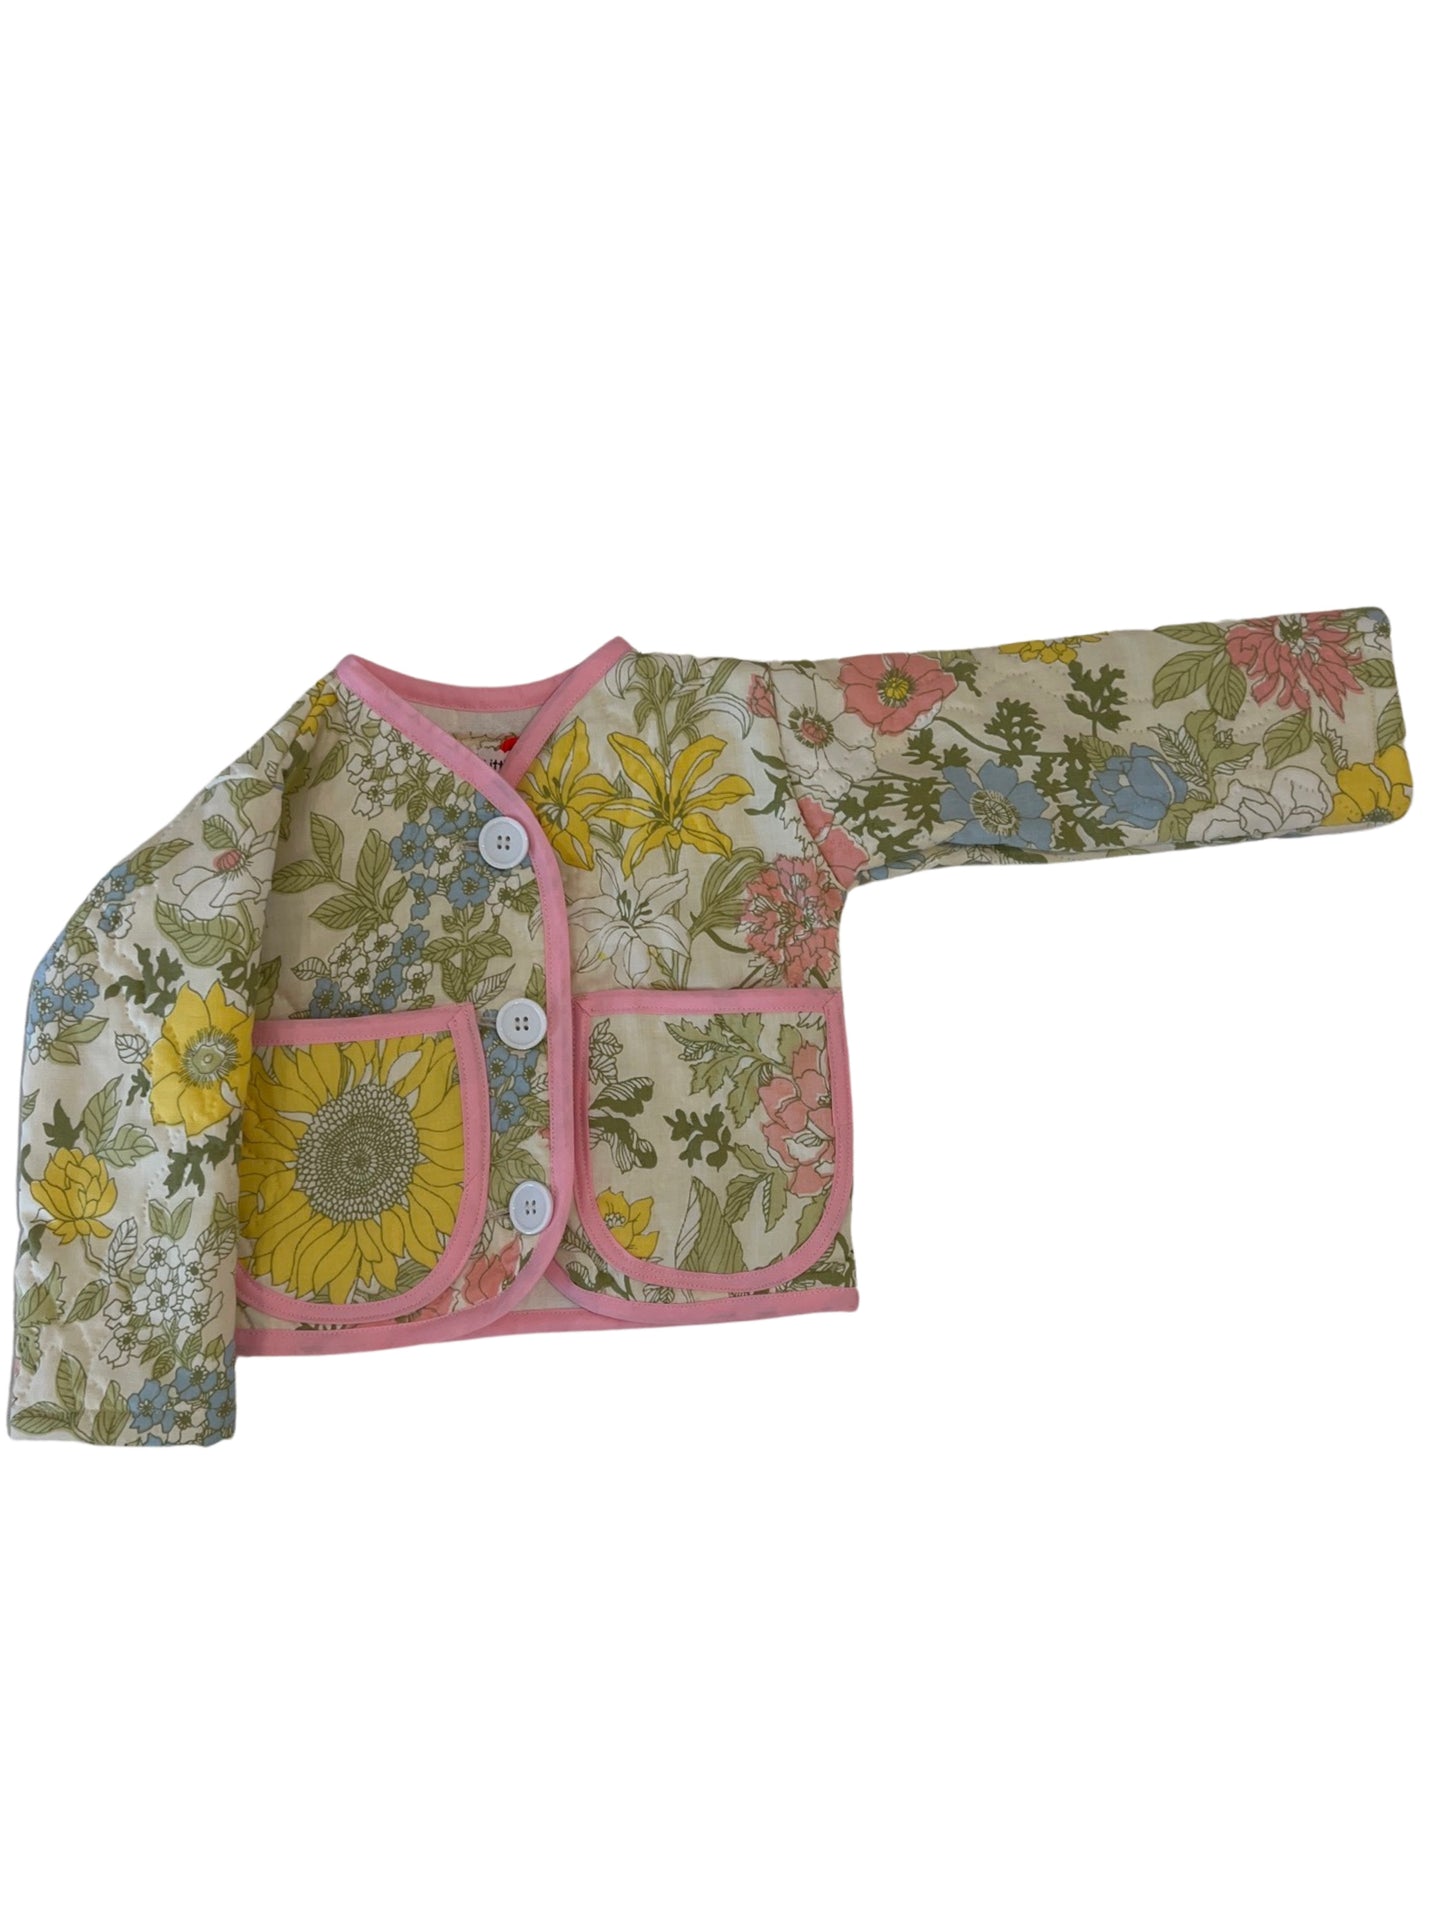 Little Lawless Quilted Jacket - SIZE 3Y